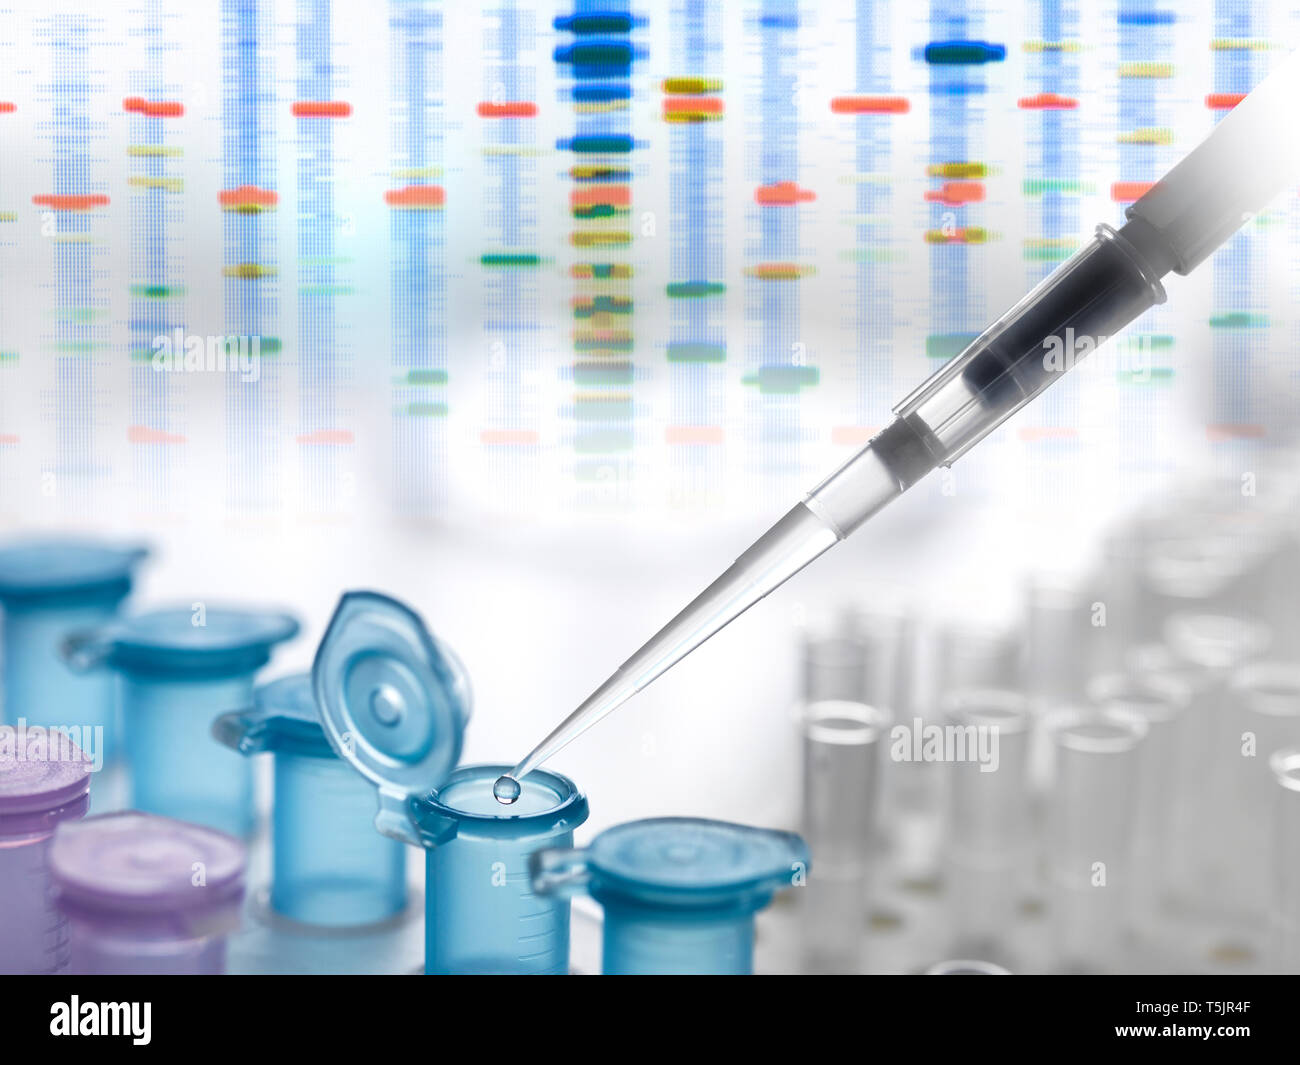 A DNA sample being pipetted into a eppendorf tube for automated analysis Stock Photo